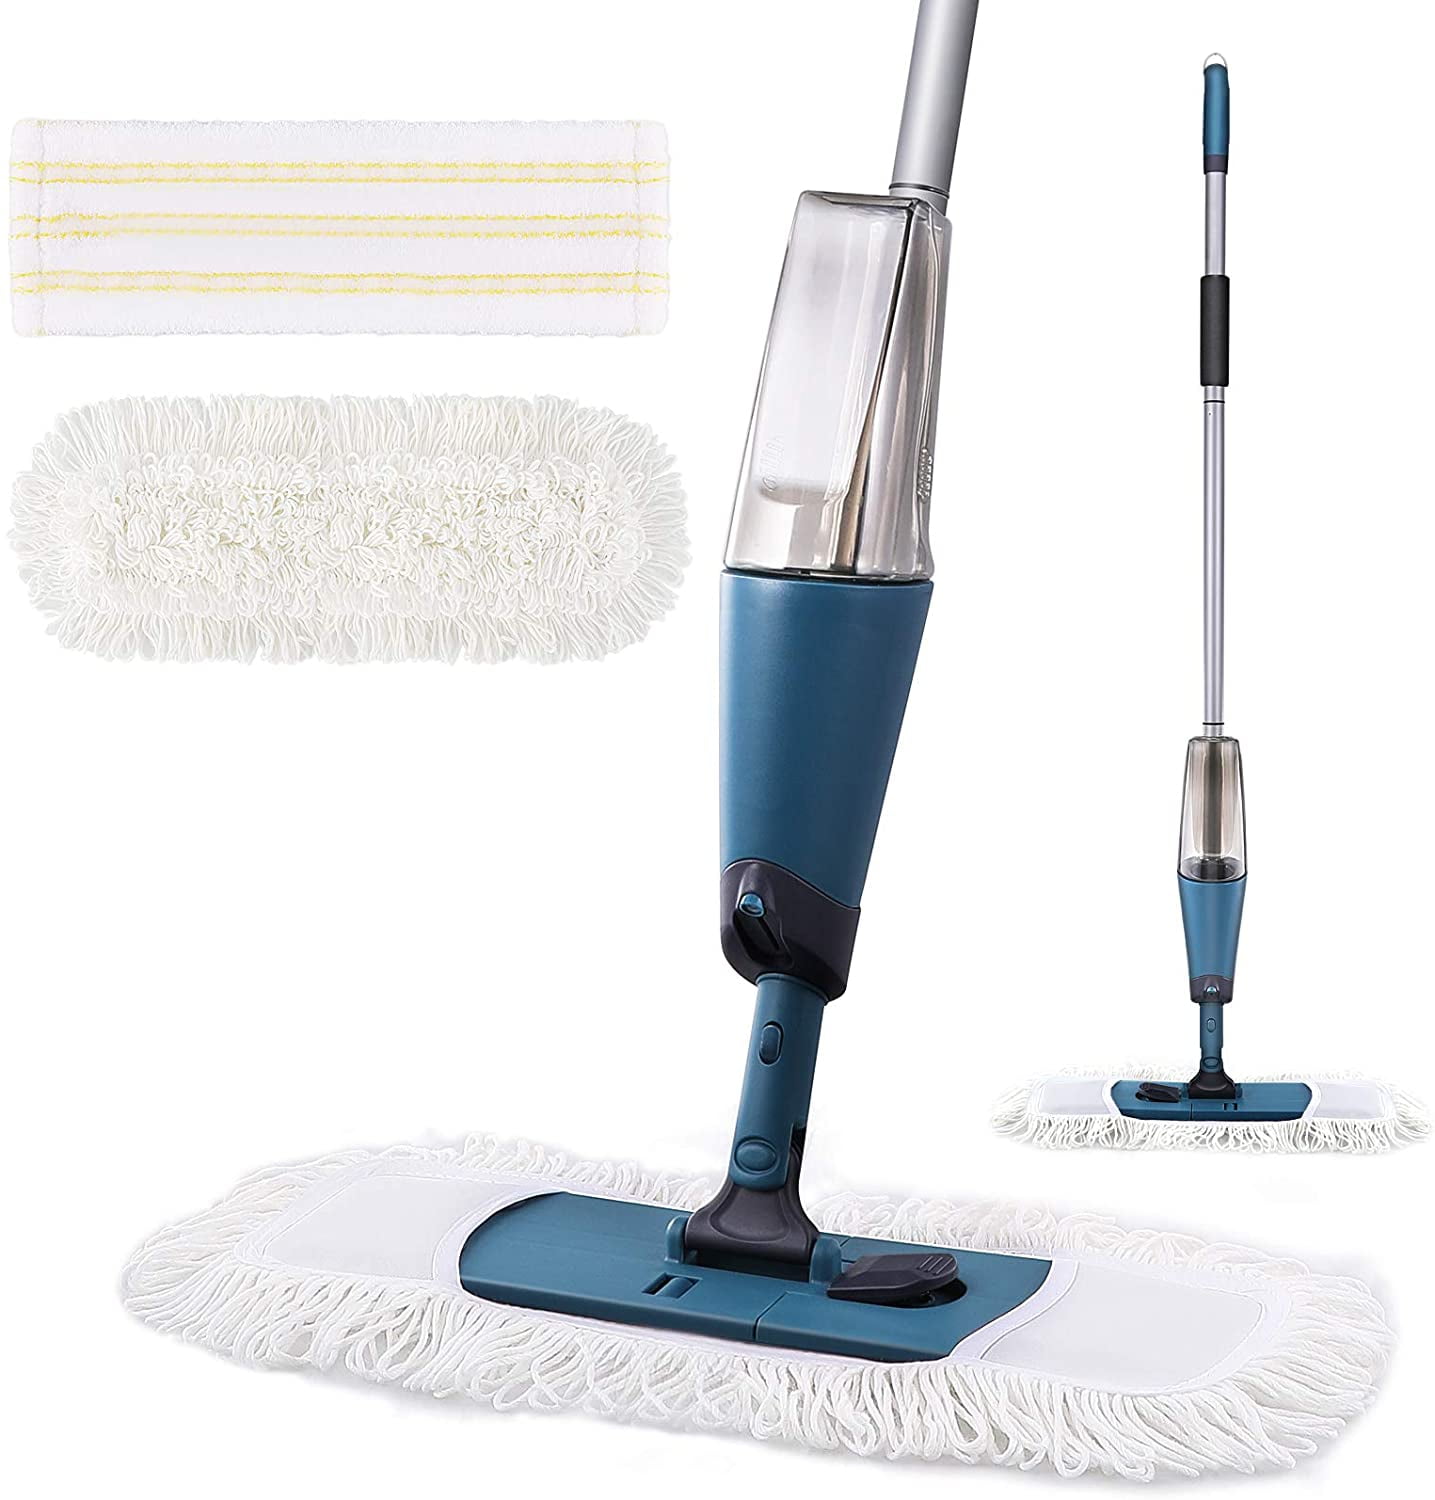 Microfiber Wet Dry Mop w/ Sprayer 2 Pads Home Store Tile Floors Cleaning 